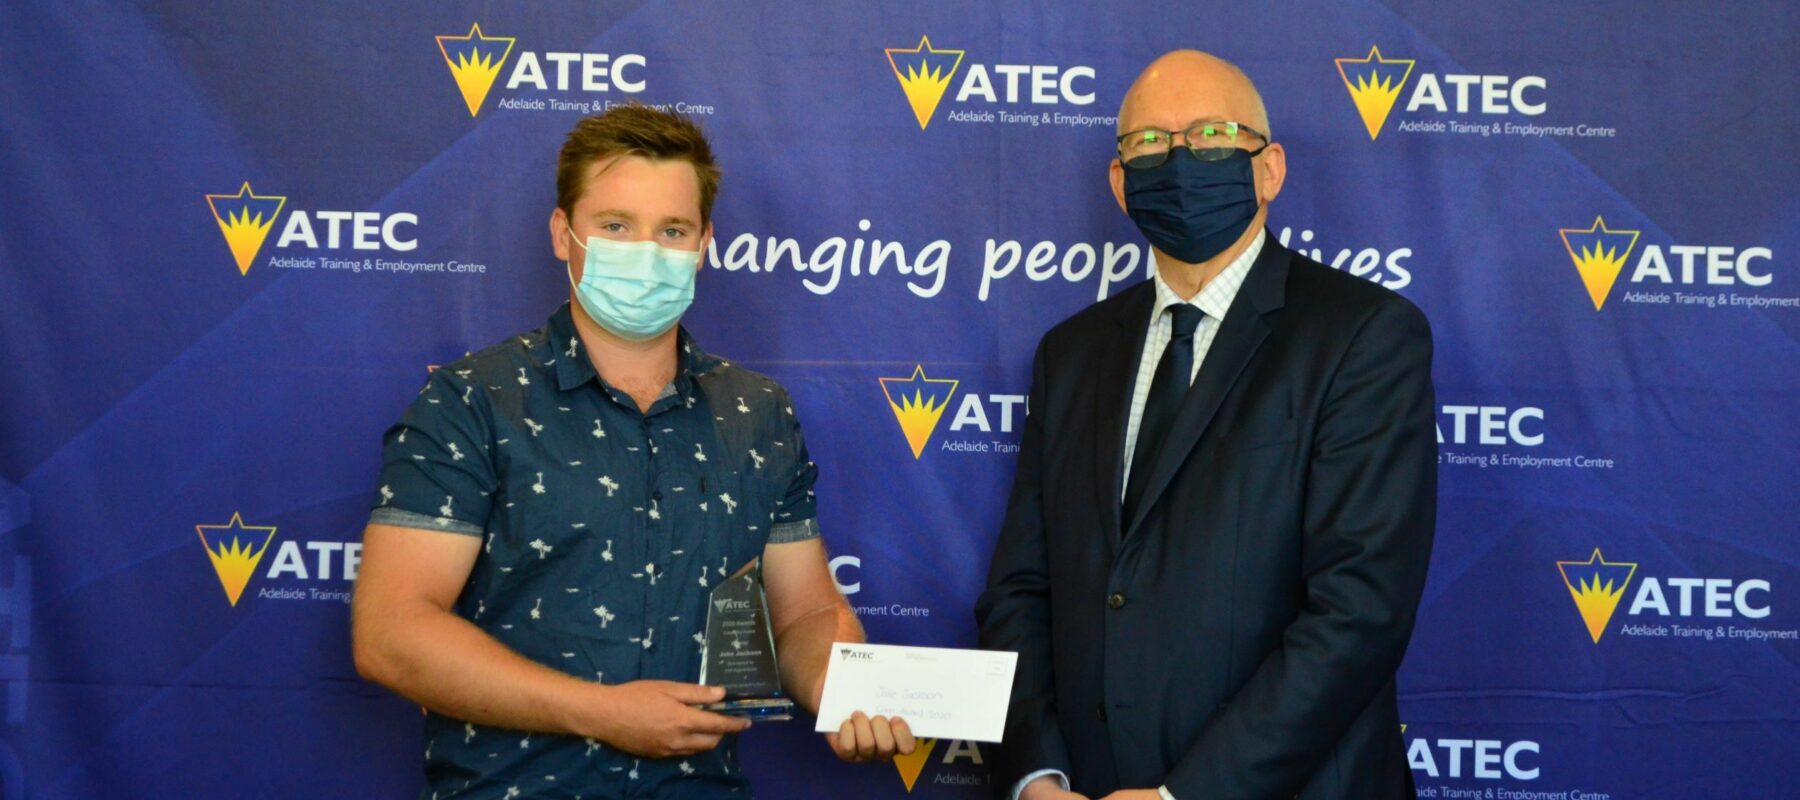 ATEC Awards for 2019 and 2020.